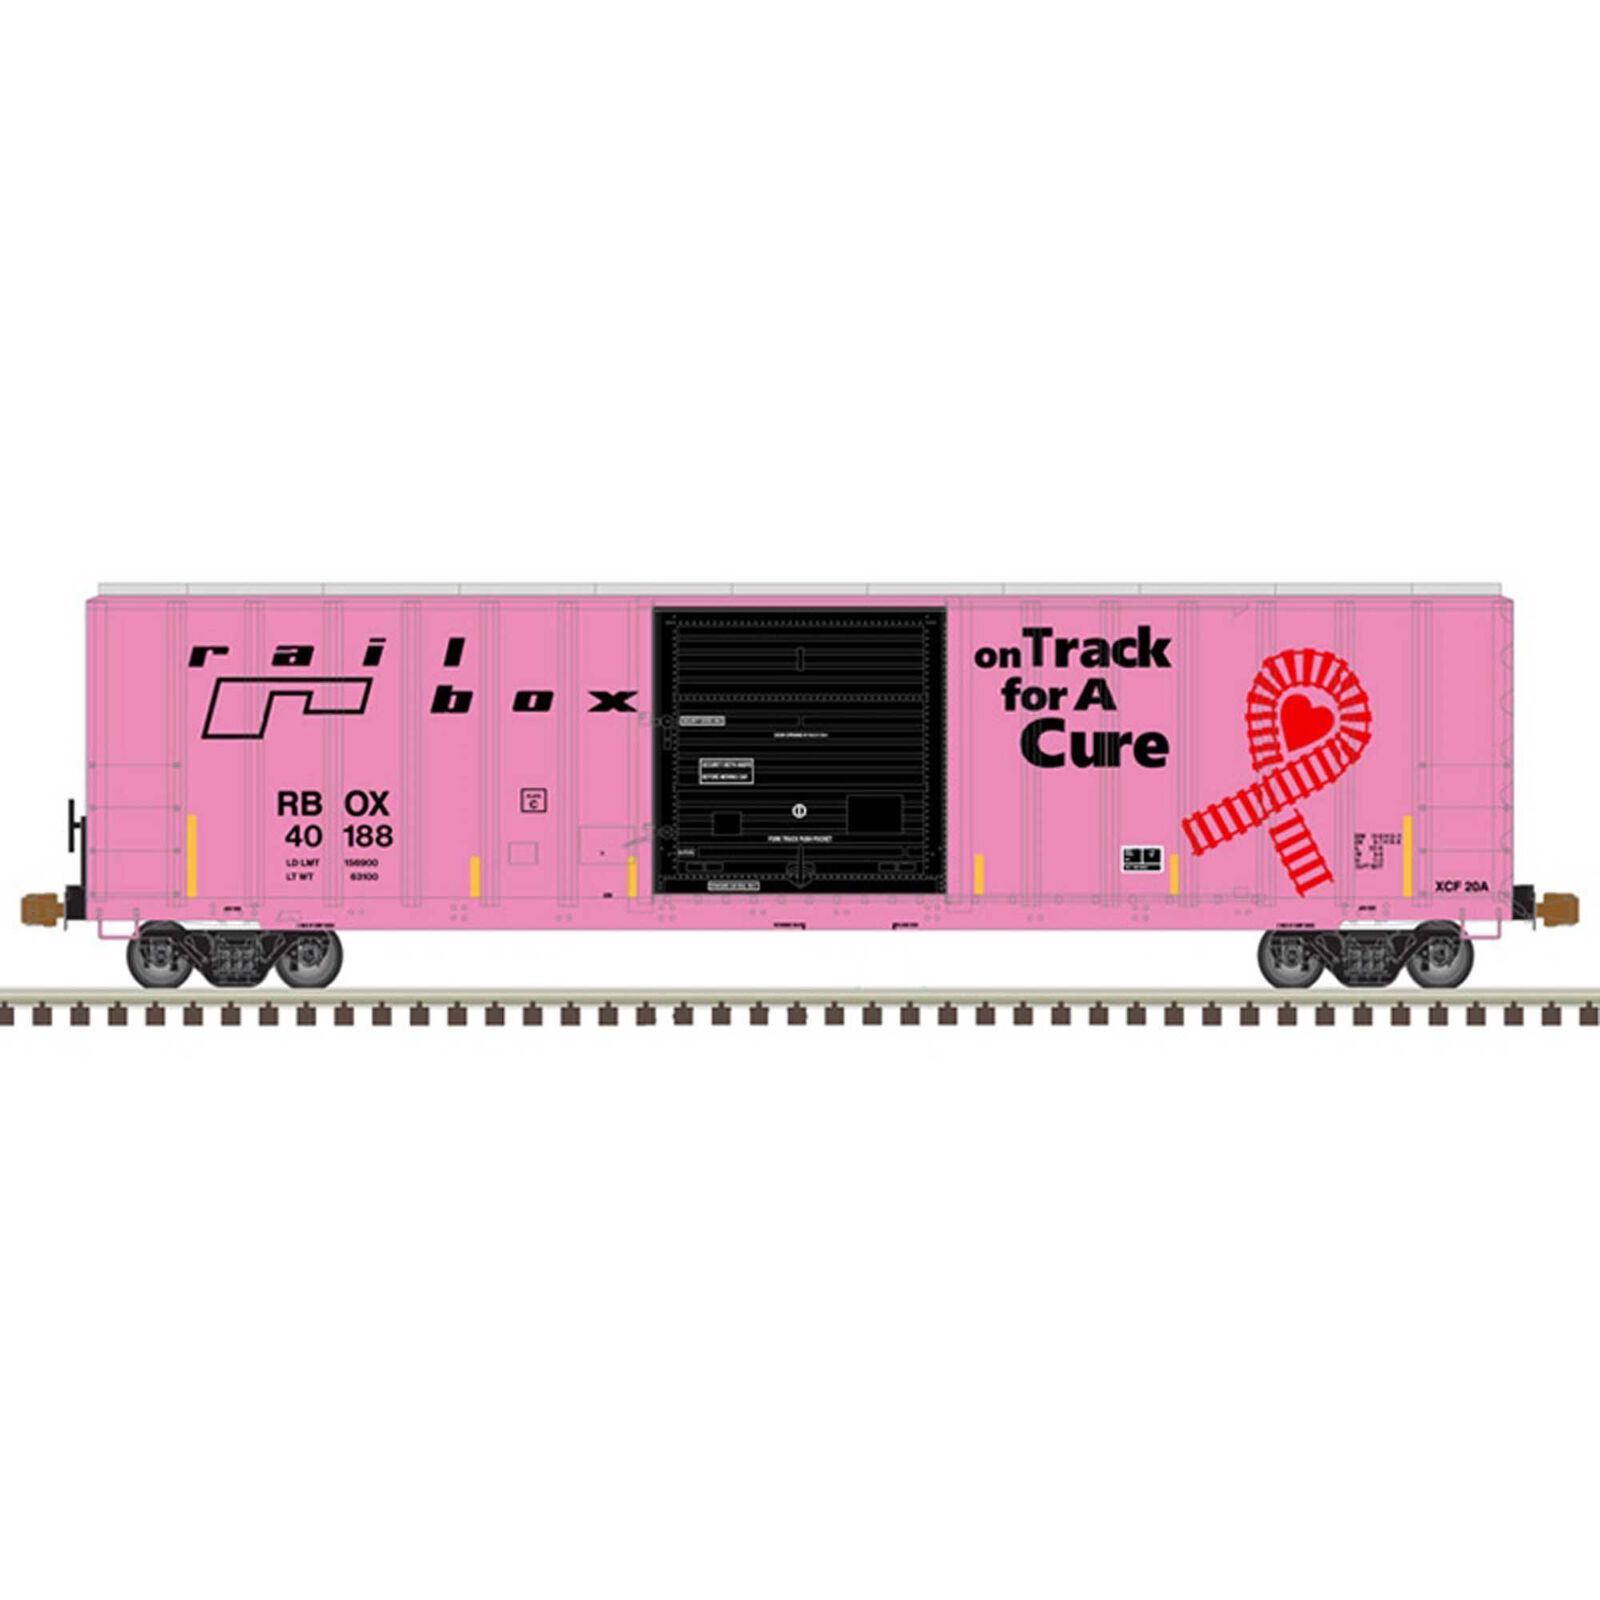 Railbox+ (On Track for a Cure) 40188 (Pink Black)